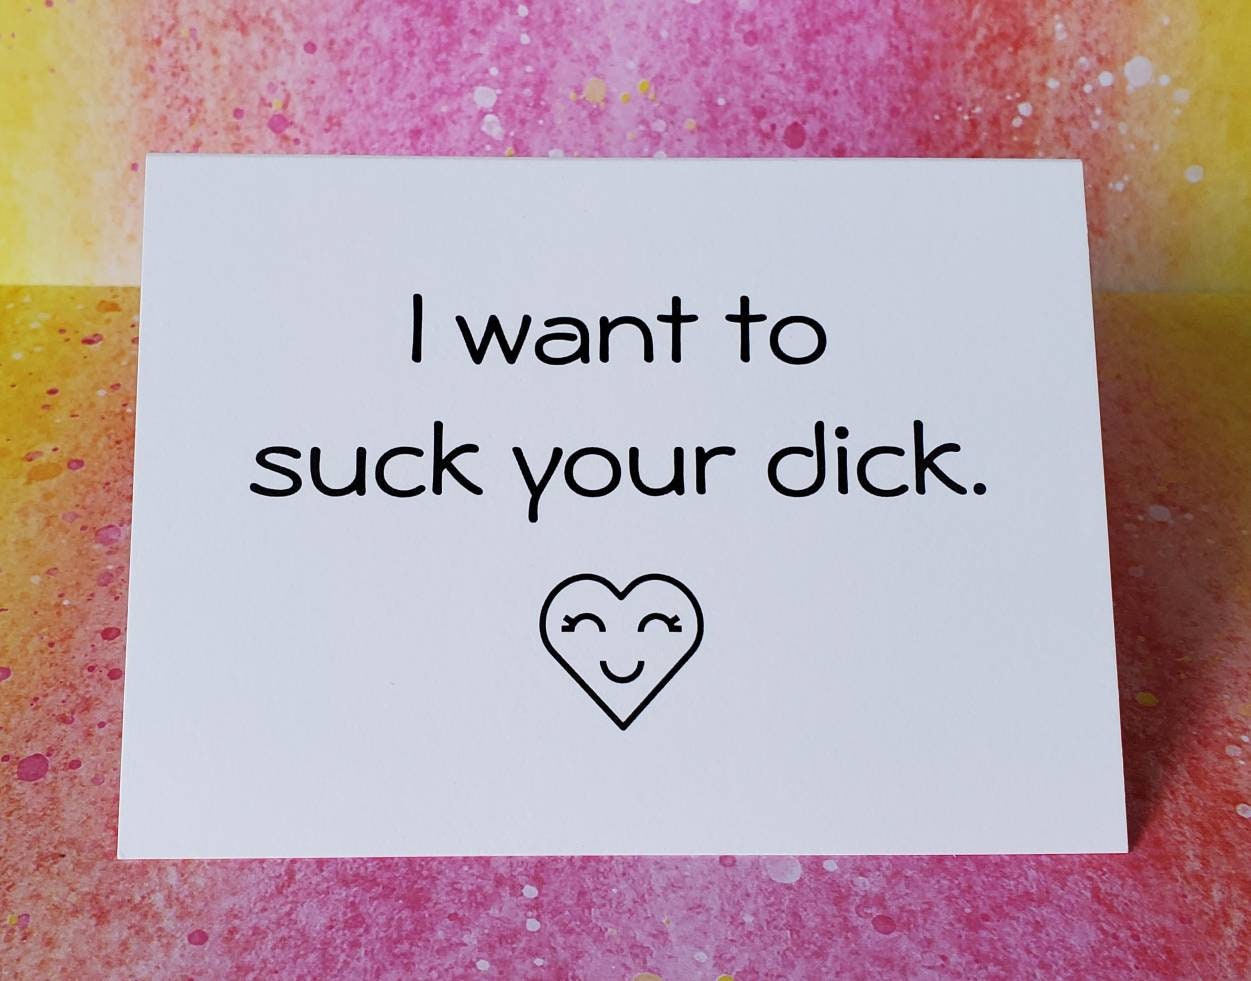 christopher leidy recommends i want to suck your cock pic